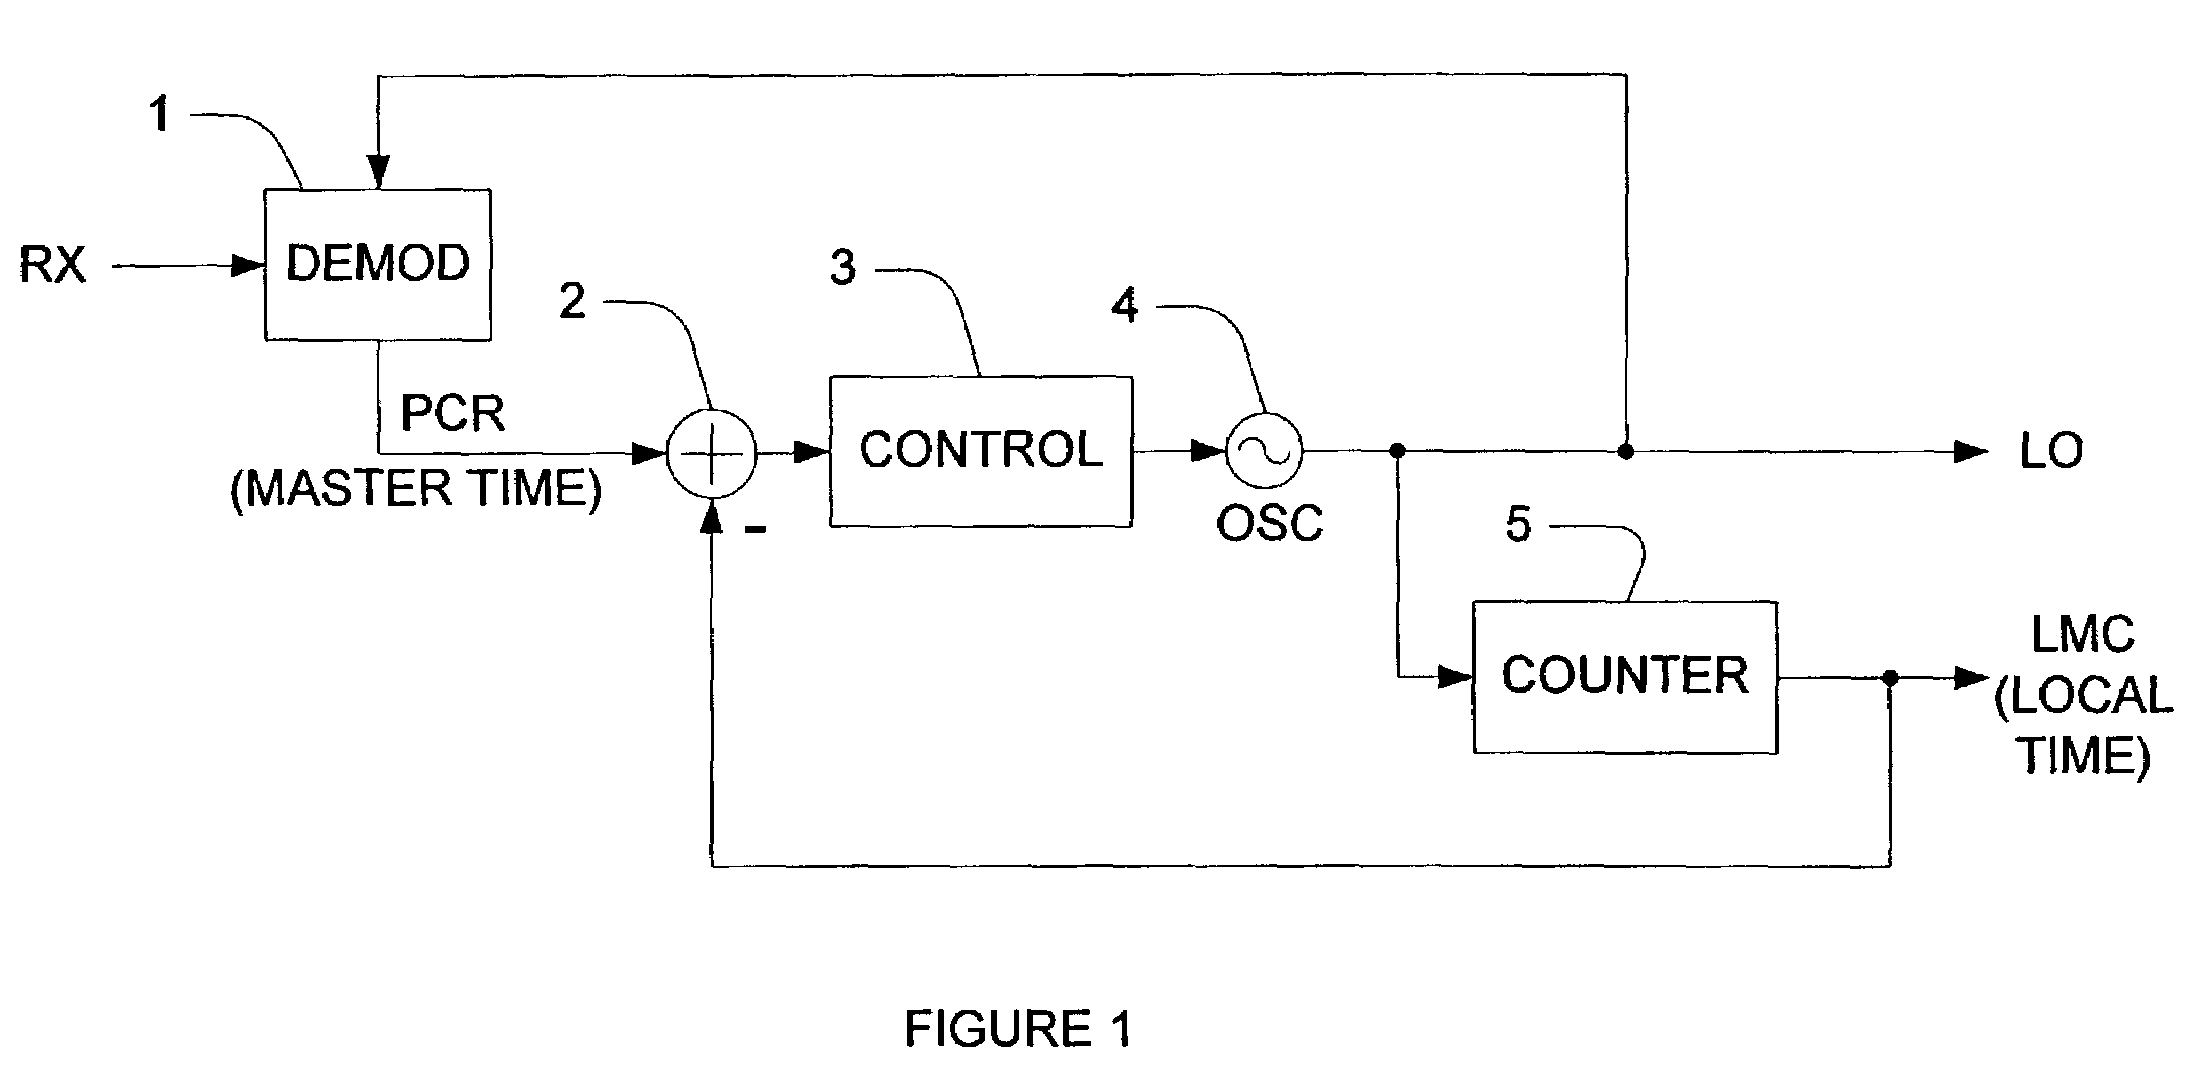 System and method of timing and frequency control in TDM/TDMA networks